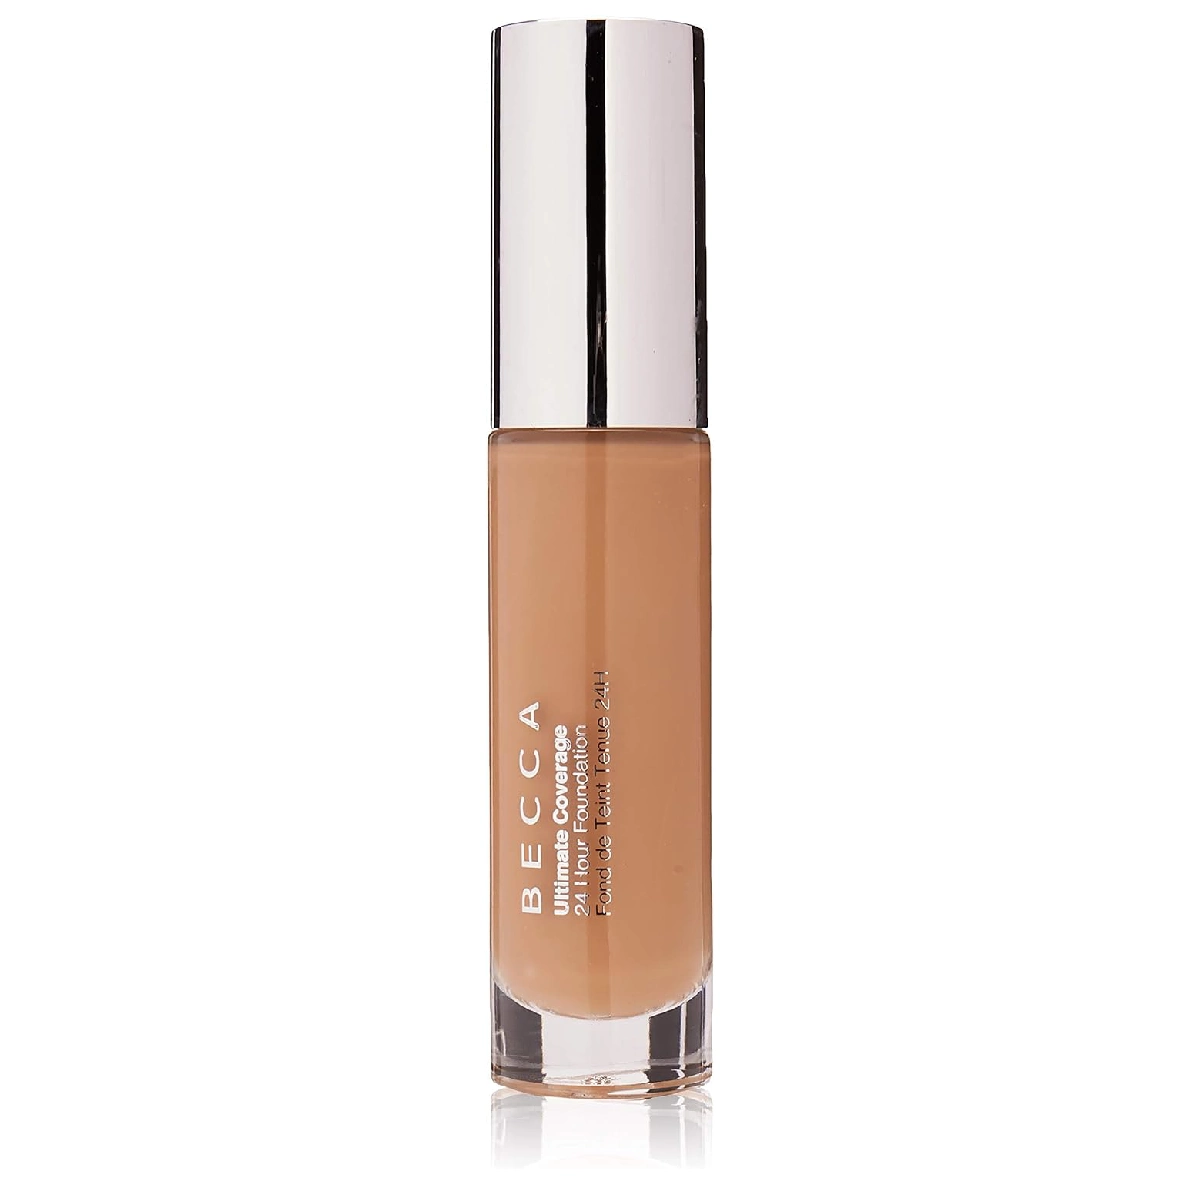 Becca Ultimate Coverage 24 Hour Foundation bottle on a white background